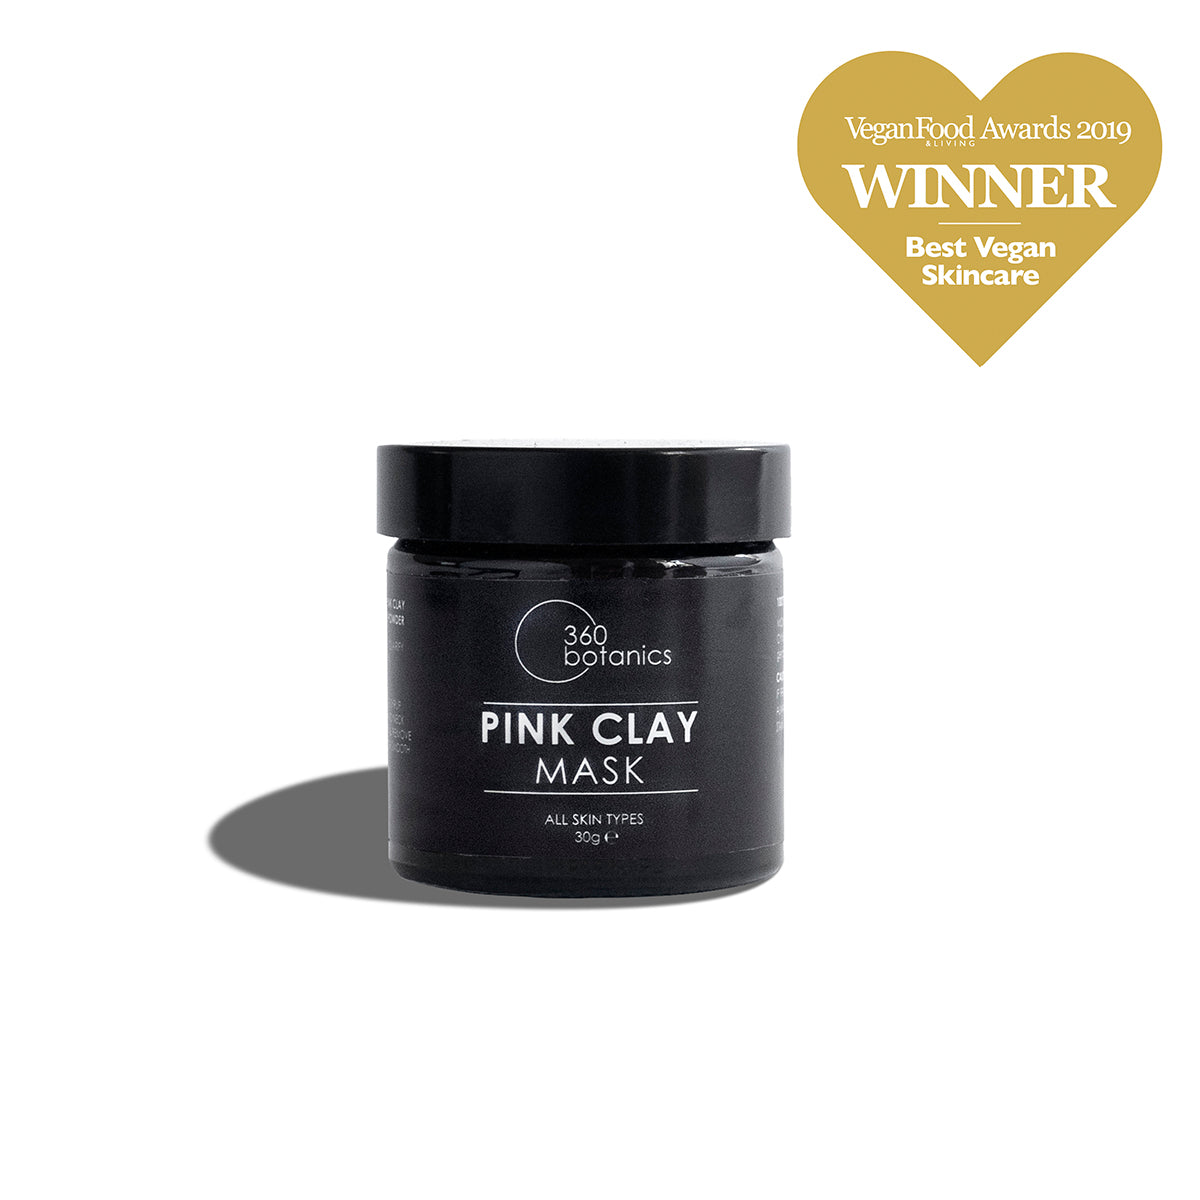 360 Botanics Pink Clay Mask in a sleek black jar against a white background, labeled for all skin types. The product has been awarded the 'Vegan Food Awards 2019 WINNER Best Vegan Skincare', which is highlighted by a golden heart-shaped badge at the top, signifying its quality and vegan-friendly formulation